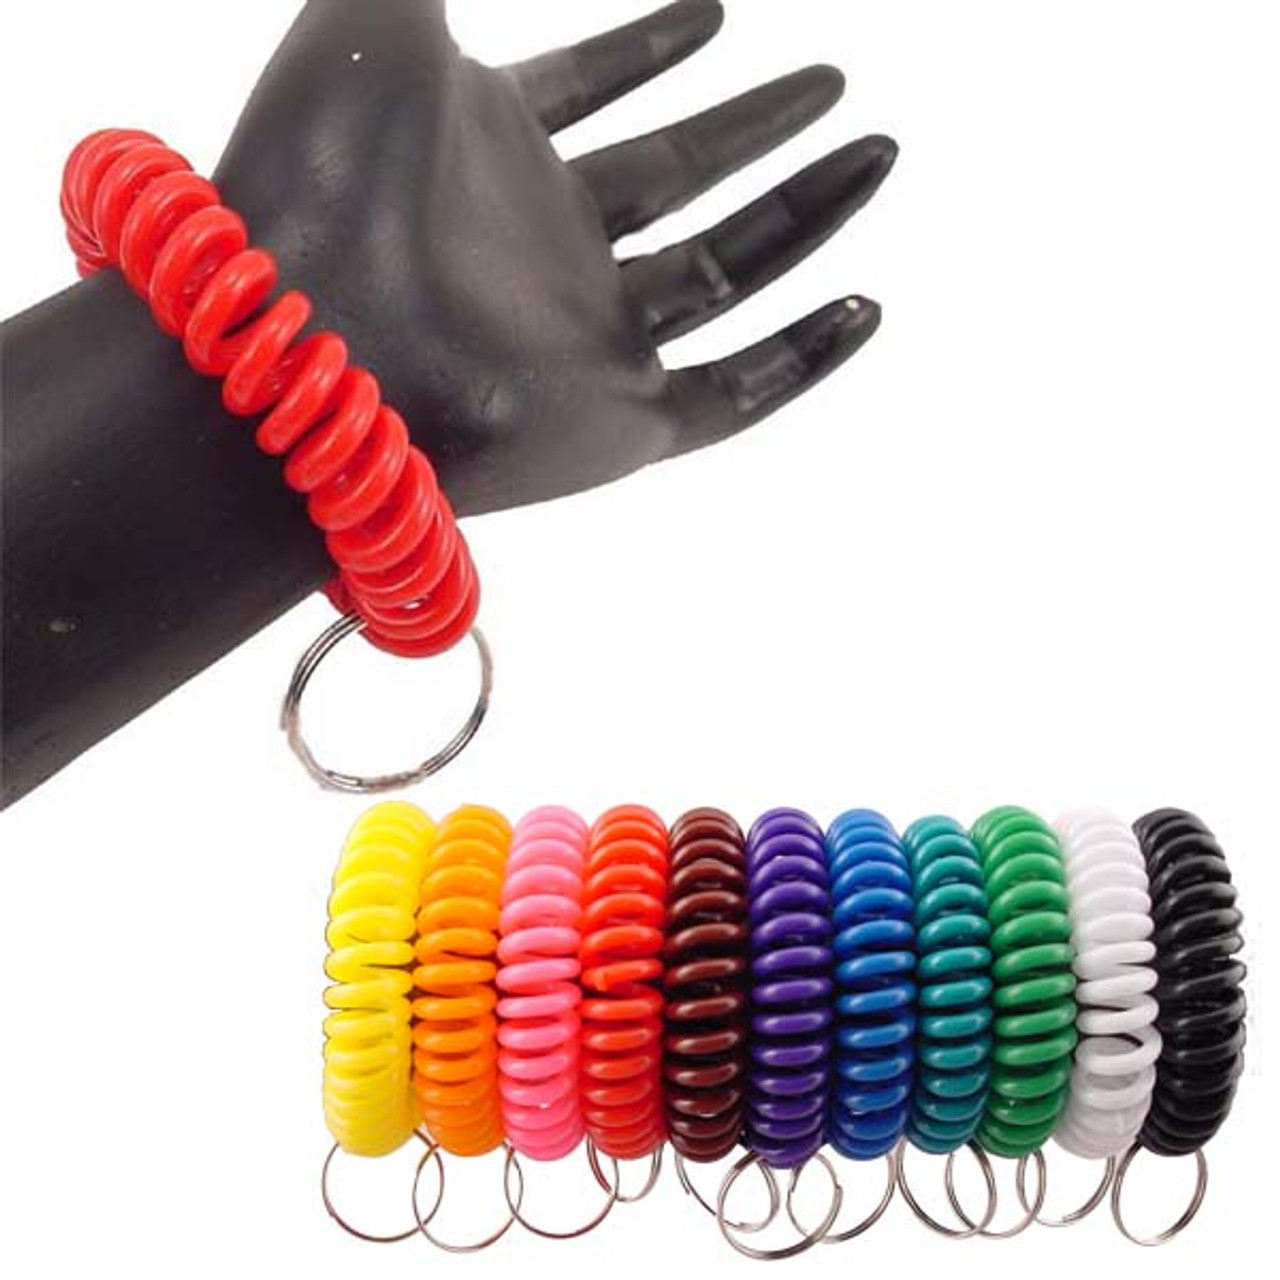 Shop for and Buy Wrist Coil Key Chain with Keyring - Bulk Pack 24